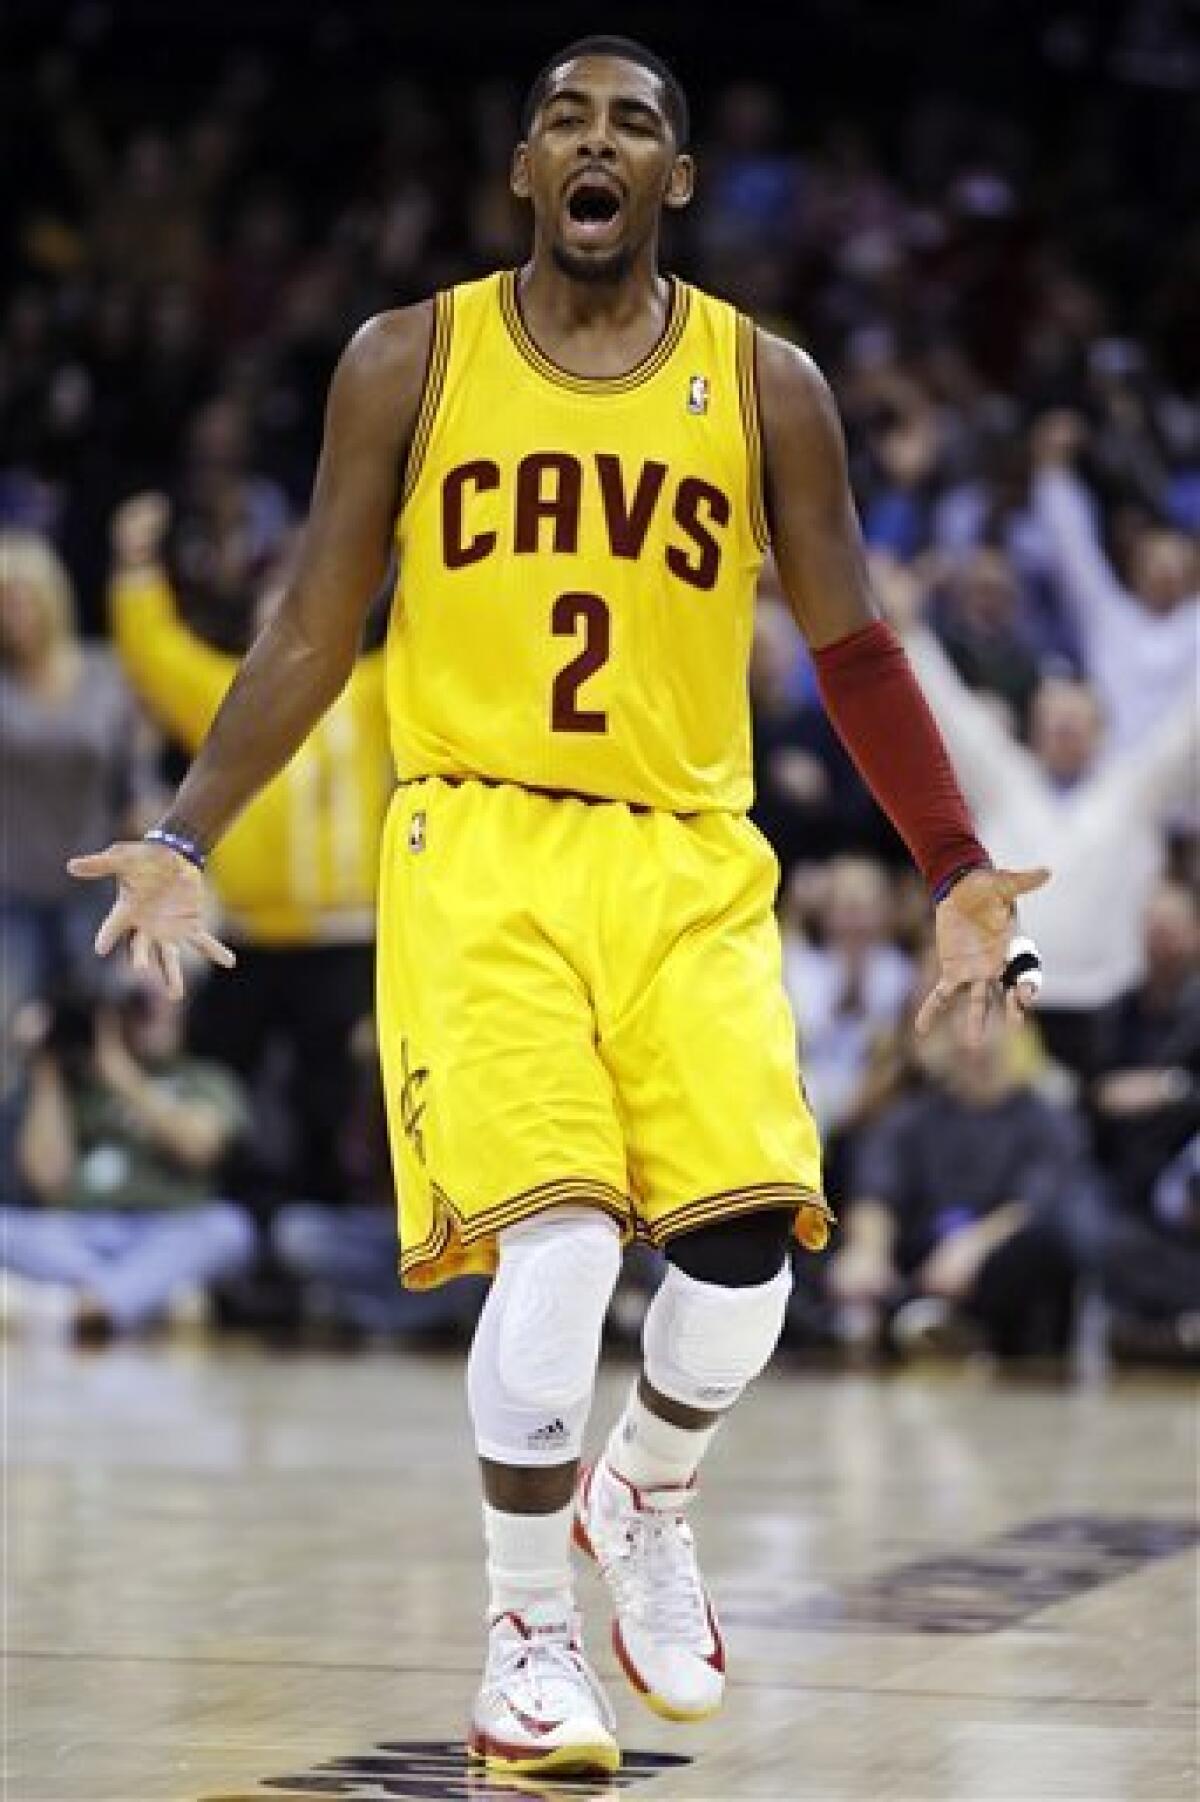 Top pick Kyrie Irving introduced by Cavs - The San Diego Union-Tribune